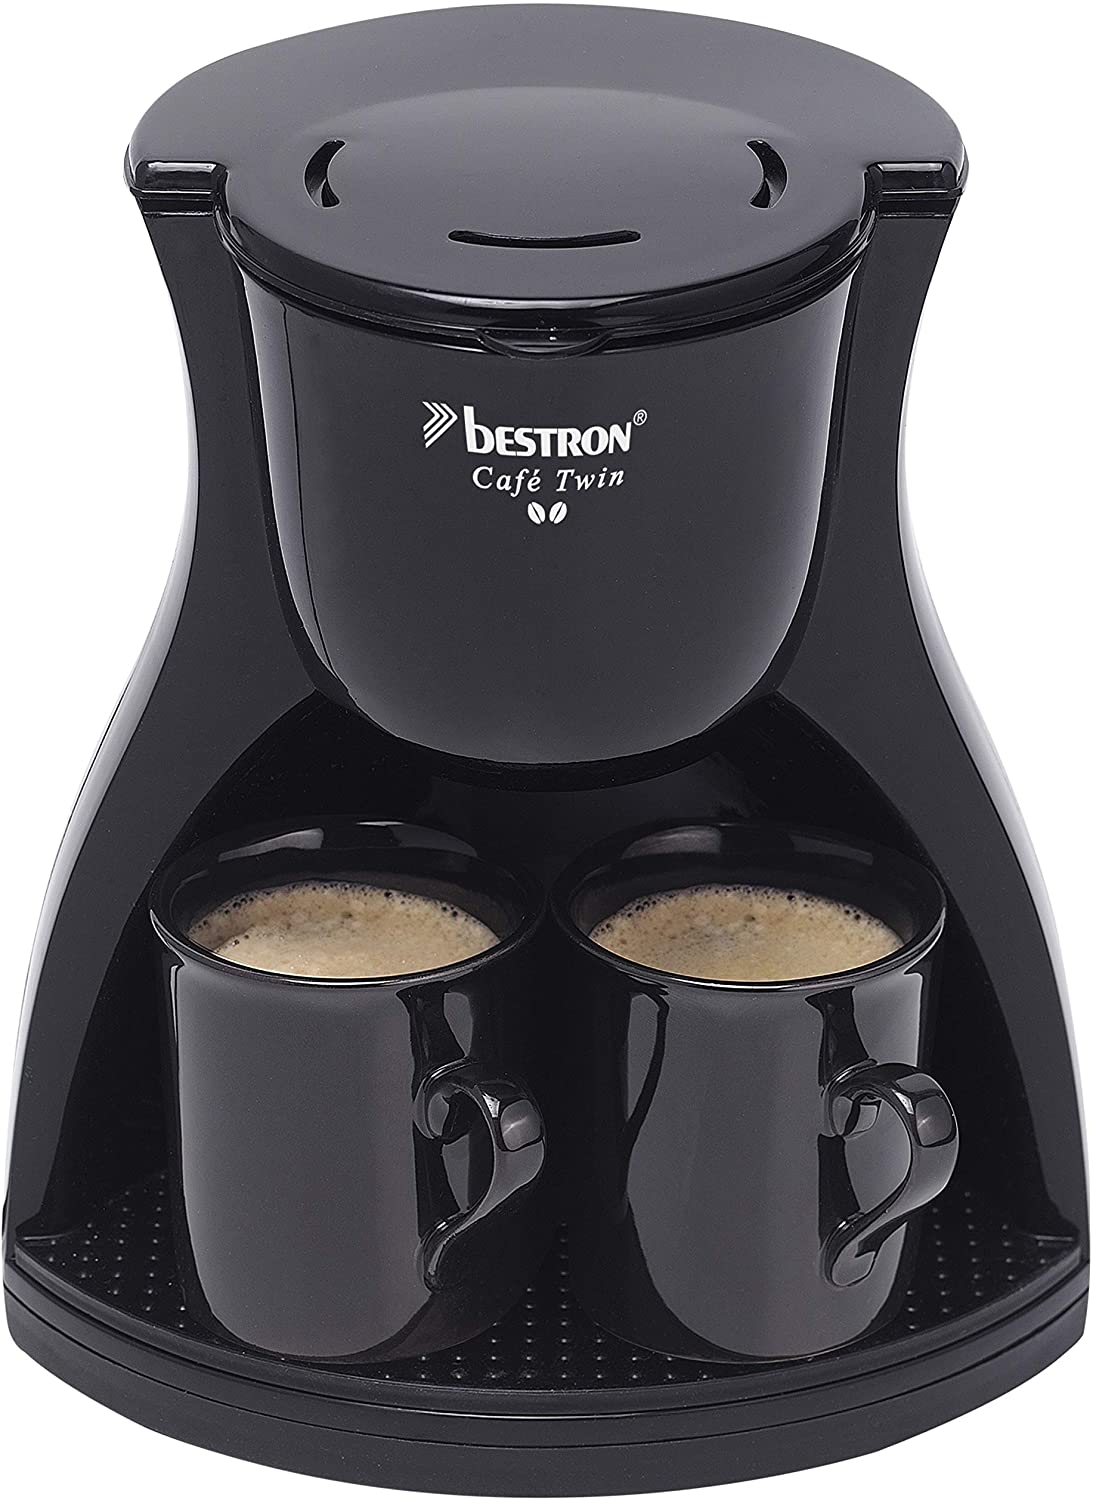 Bestron Duo Coffee Maker with 2 Cups for Ground Filter Coffee 450 Watt Black